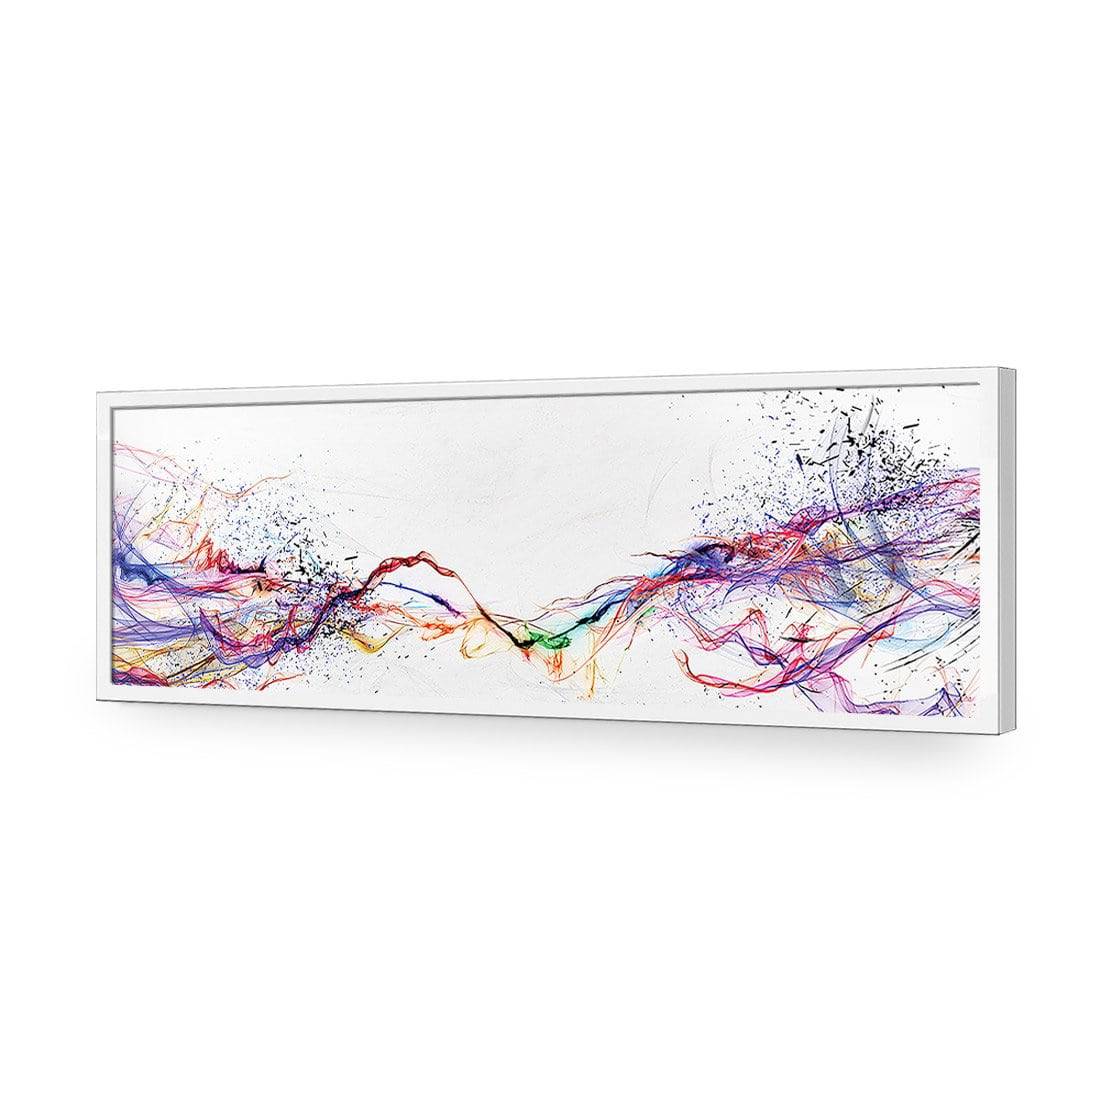 Electricity On Black, Inverted, Long-Acrylic-Wall Art Design-Without Border-Acrylic - White Frame-60x20cm-Wall Art Designs